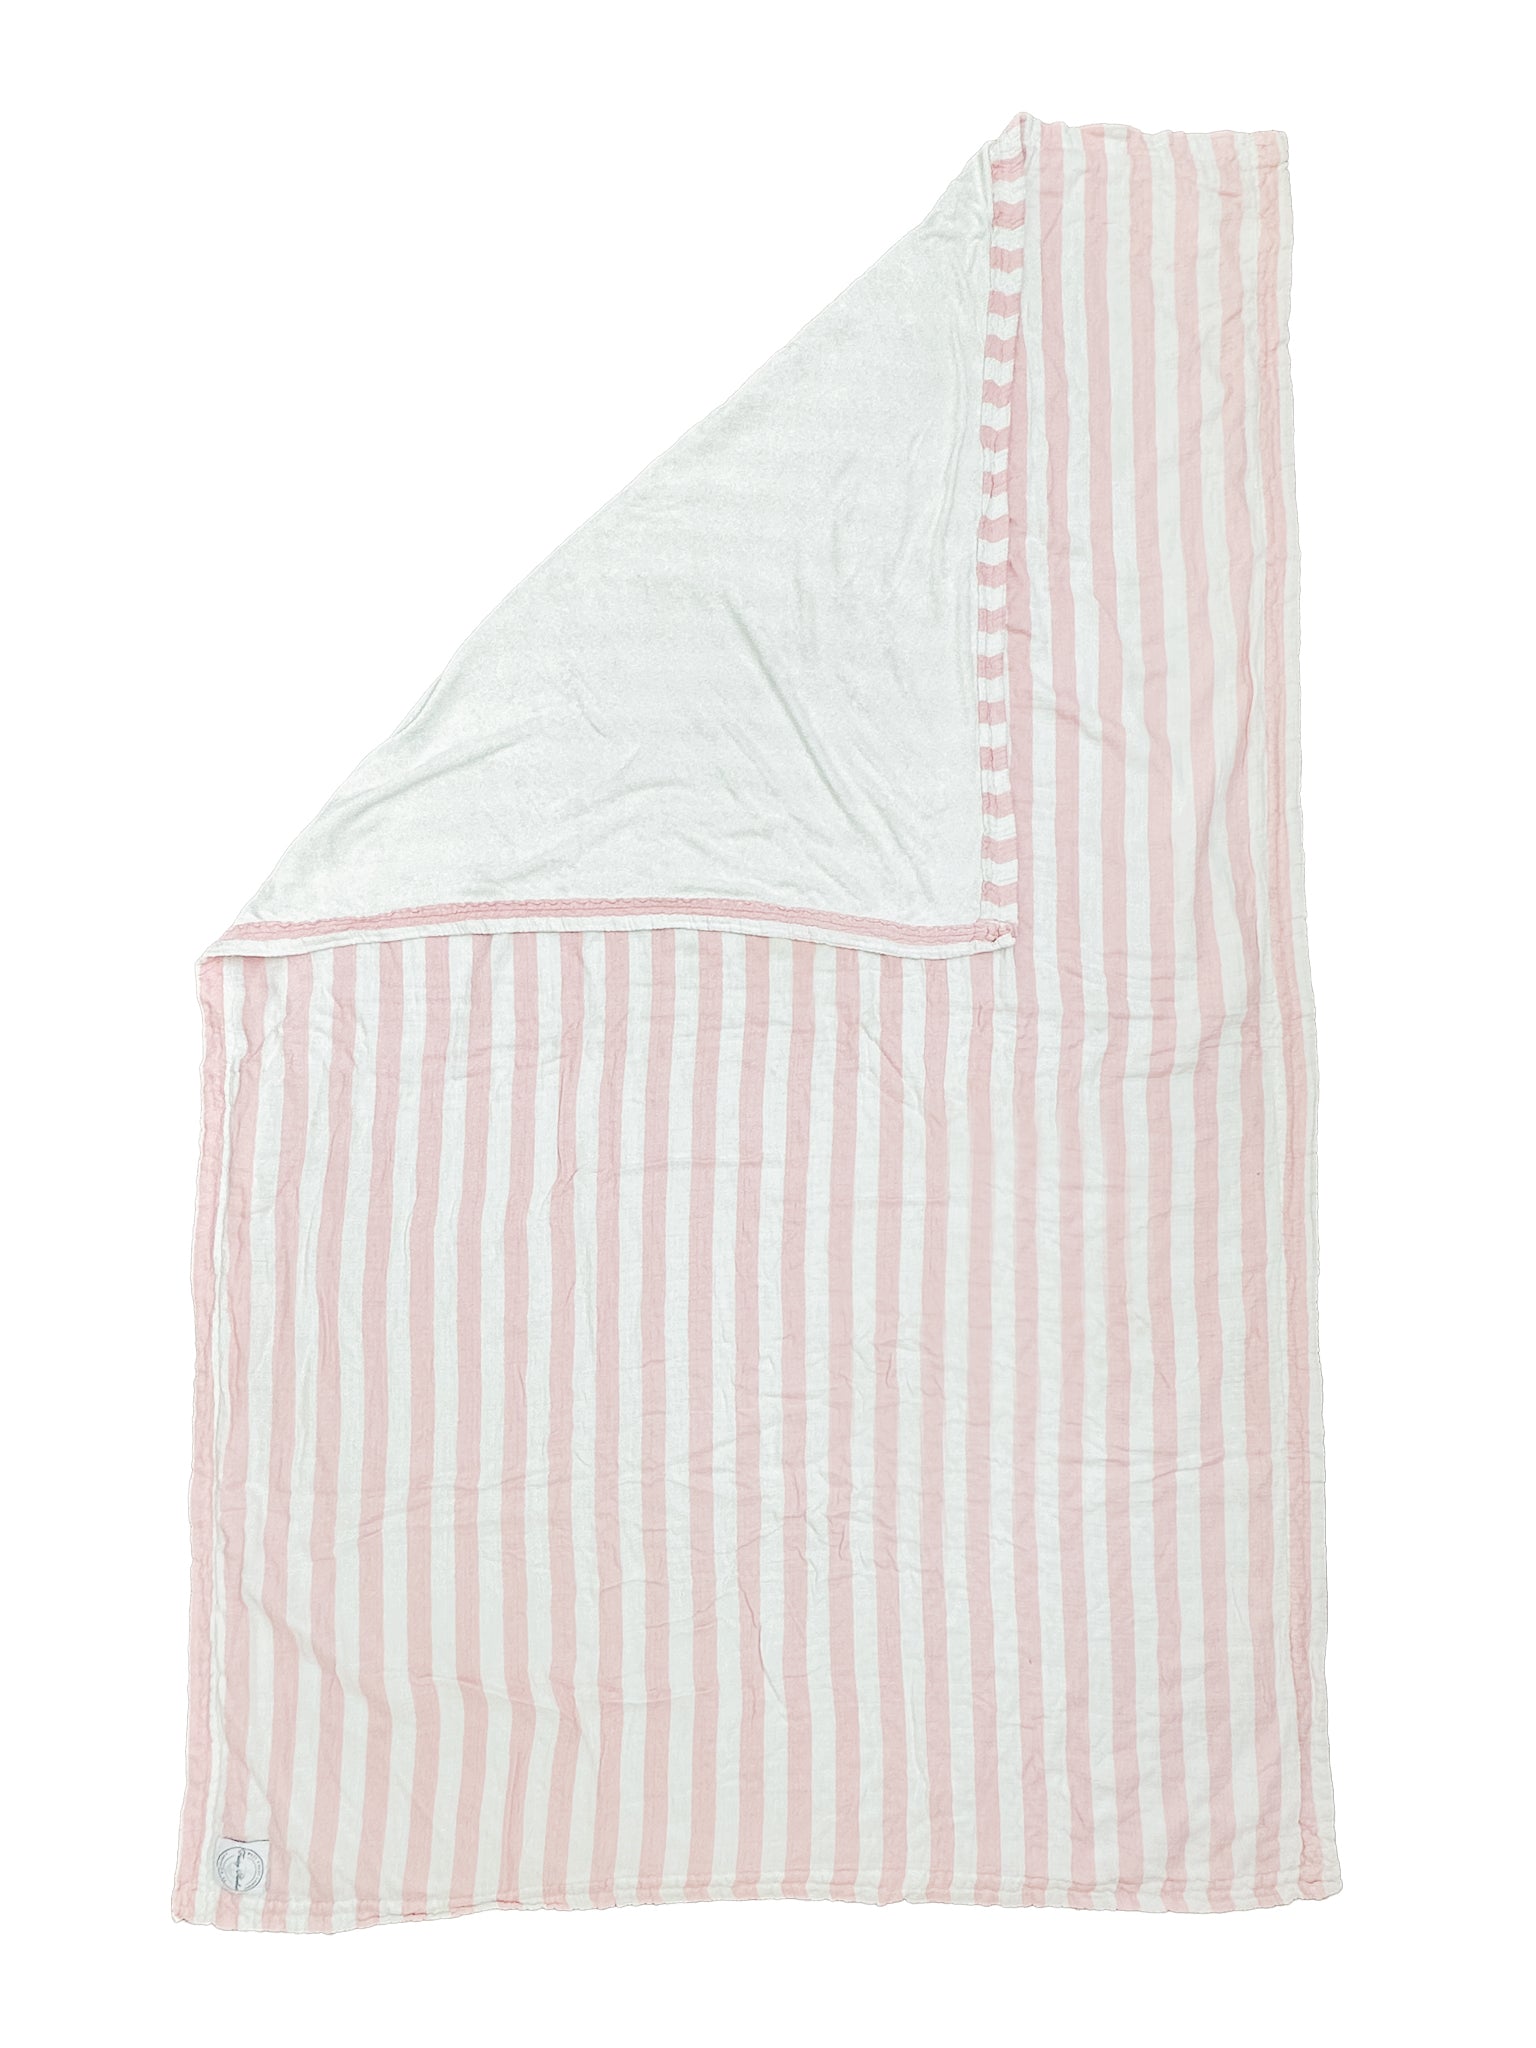 The Cloud Towel™ - Pink & White Stripe - Friday Harbour Lifestyle Company 